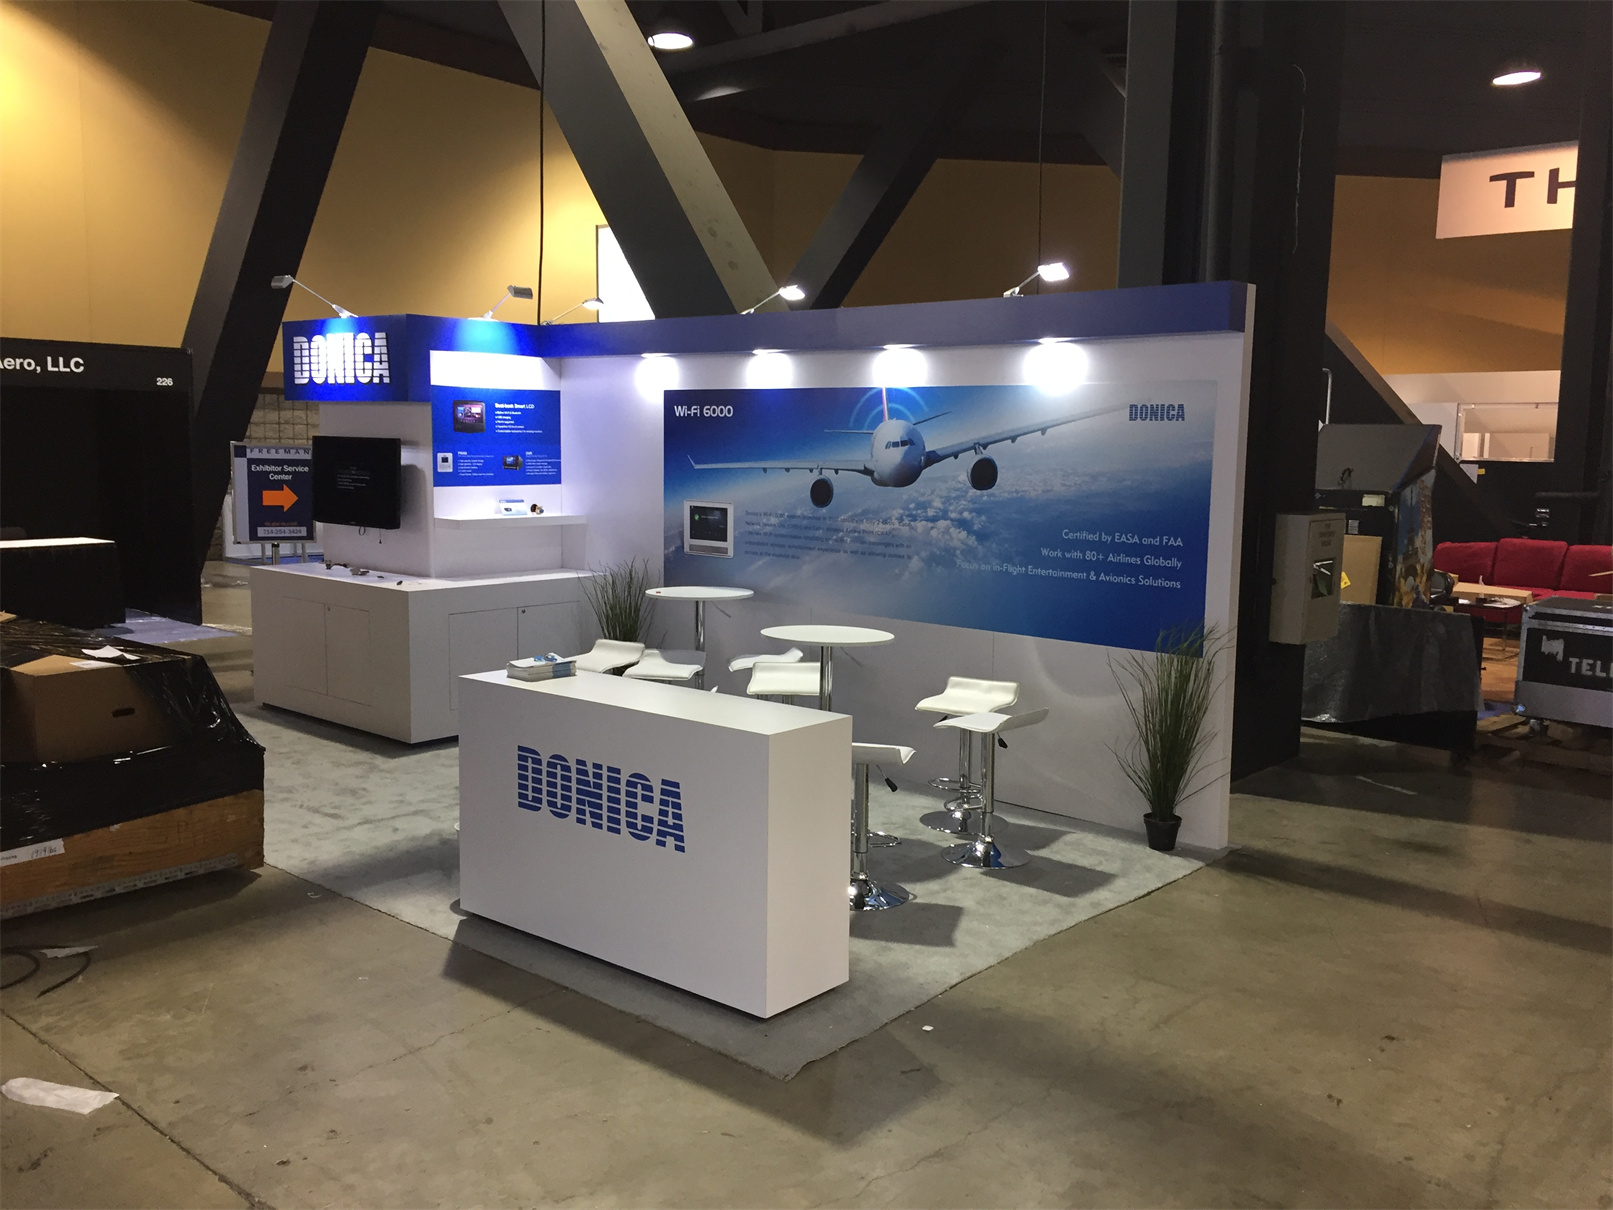 Donica 10 039 X 20 039 Licensing Expo Trade Show Booth Rental Las Vegas